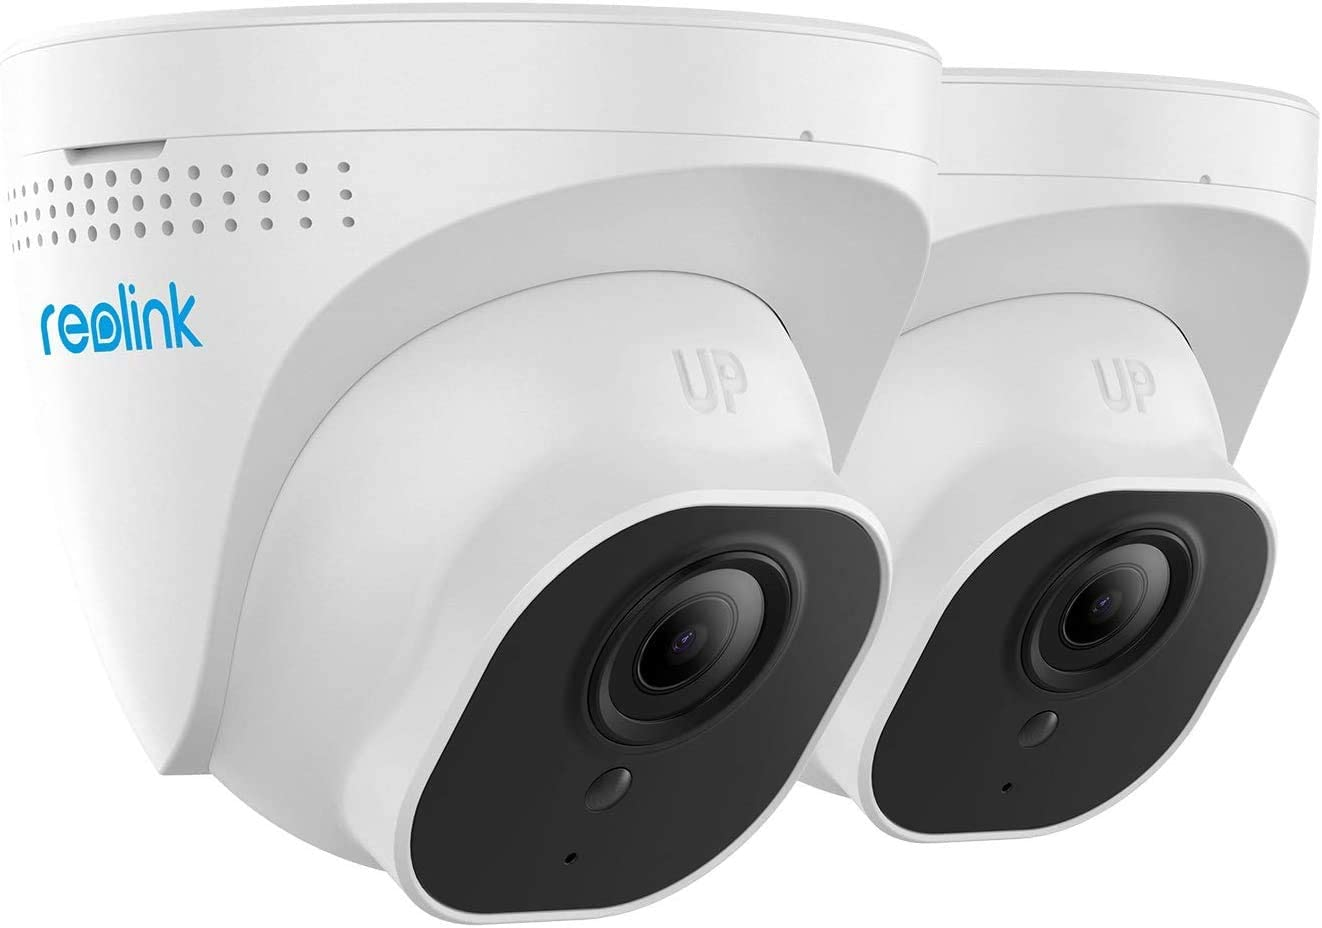 Reolink PoE IP Camera (Pack of 2) Outdoor 5MP HD Video Surveillance Work with Google Assistant, IR Night Vision Motion Detection SD Card Slot, RLC-520 $75.99